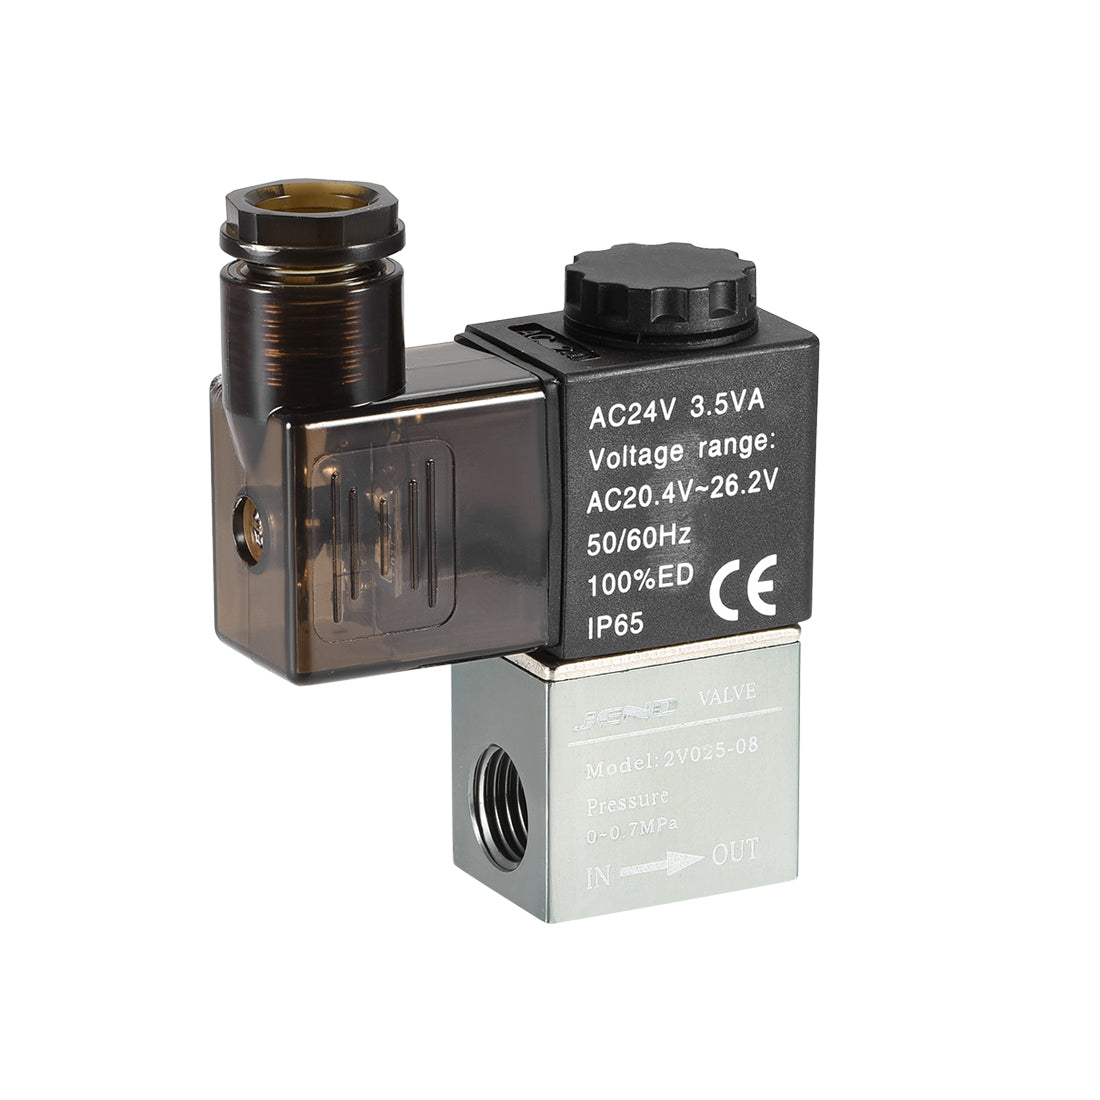 uxcell Uxcell 2V025-08 Pneumatic Air NC Single Electrical Control Solenoid Valve AC 24V 2 Way 2 Position 1/4" PT Internally Piloted Acting Type